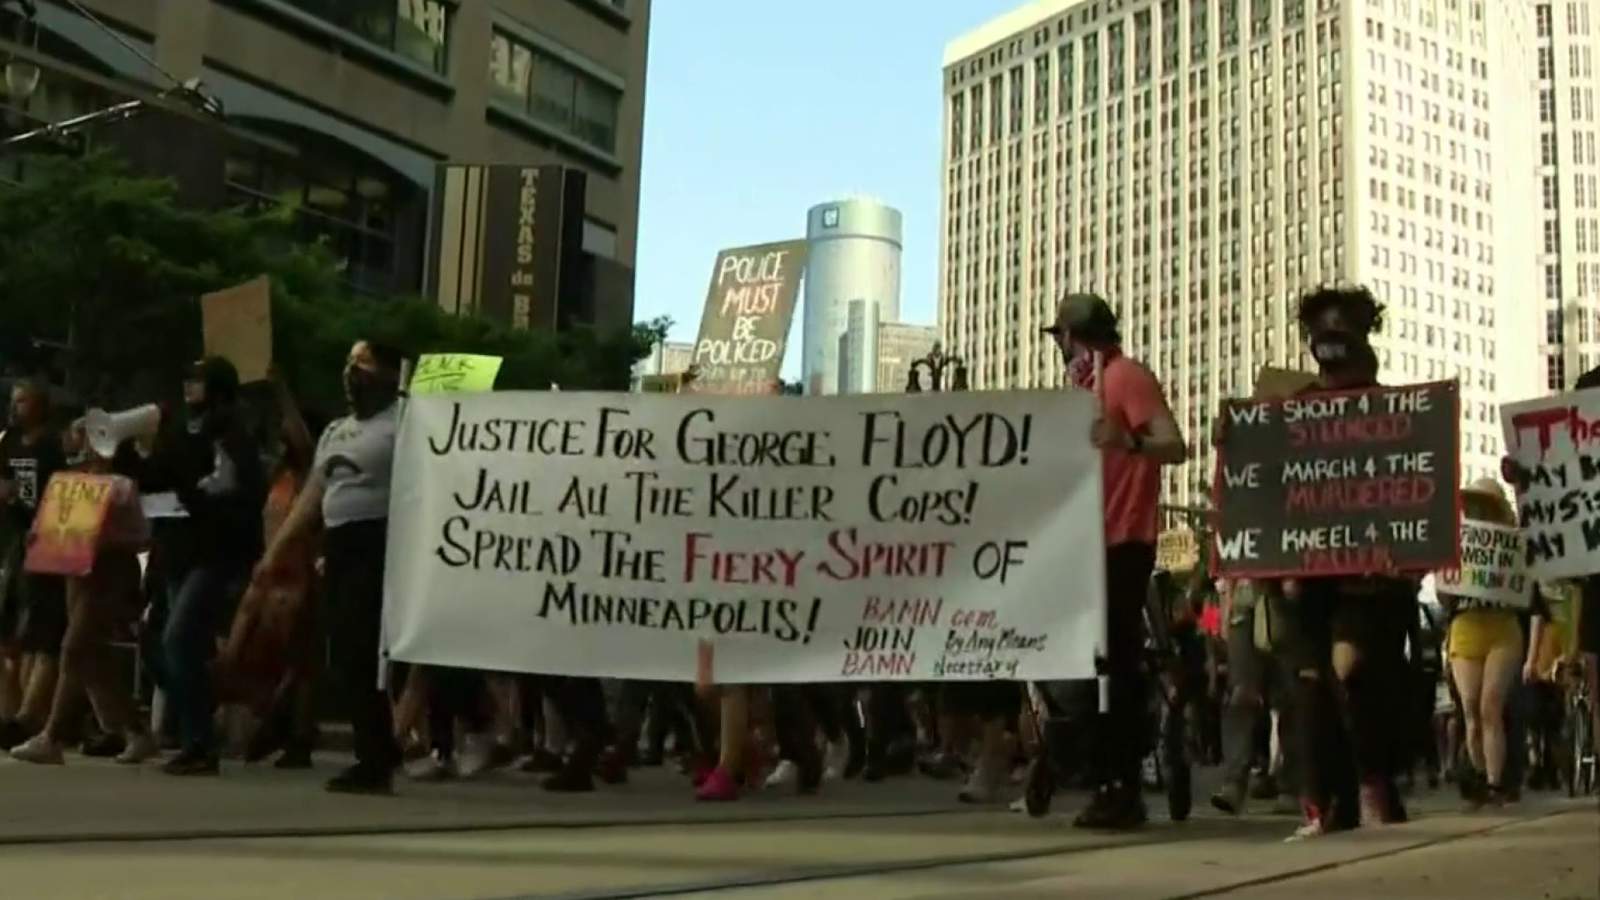 Protest organizers to meet with Detroit mayor Mike Duggan, police chief James Craig